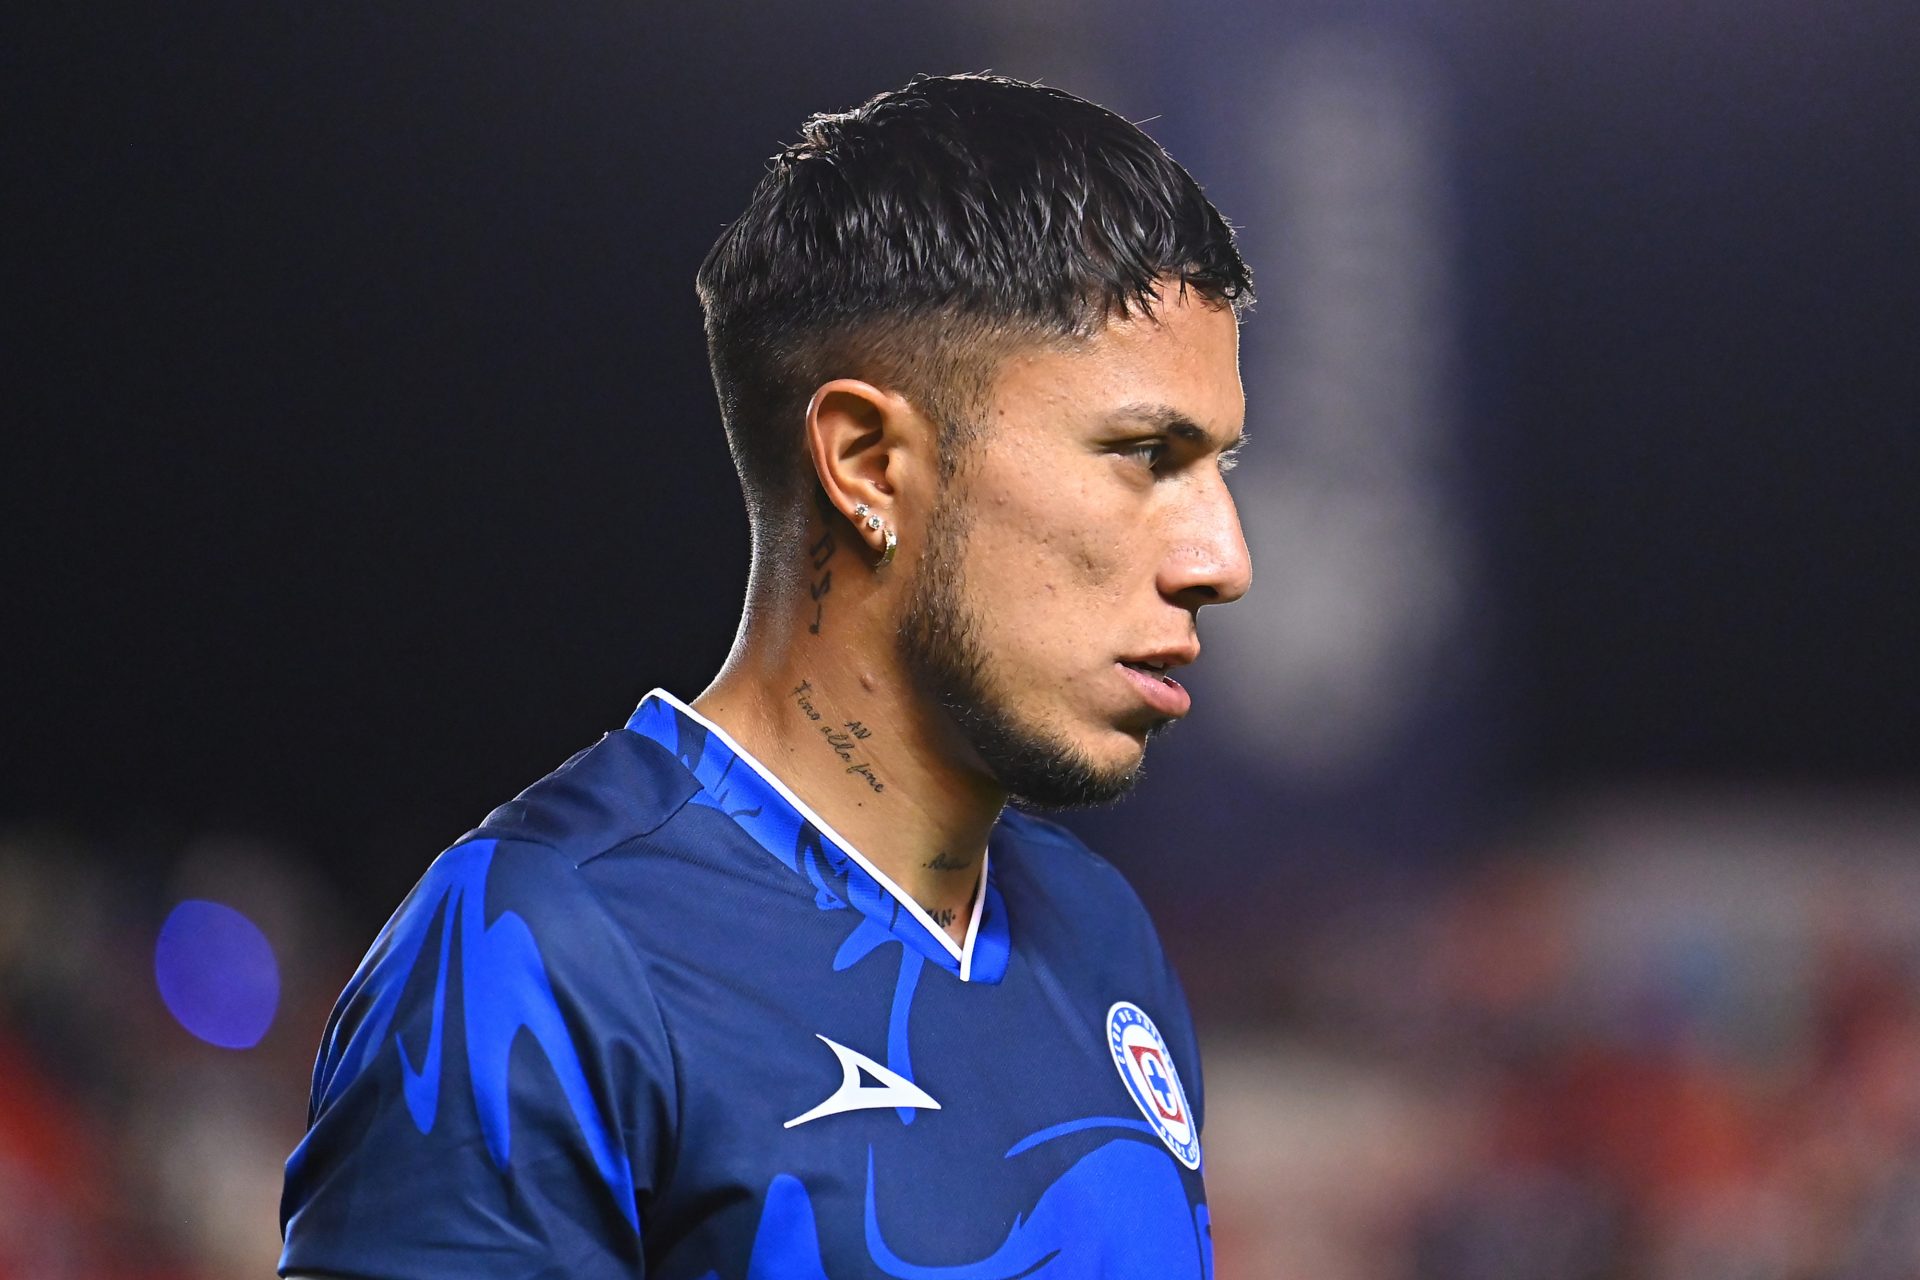 Mexican football player Carlos Salcedo shaken by tragic murder of his sister